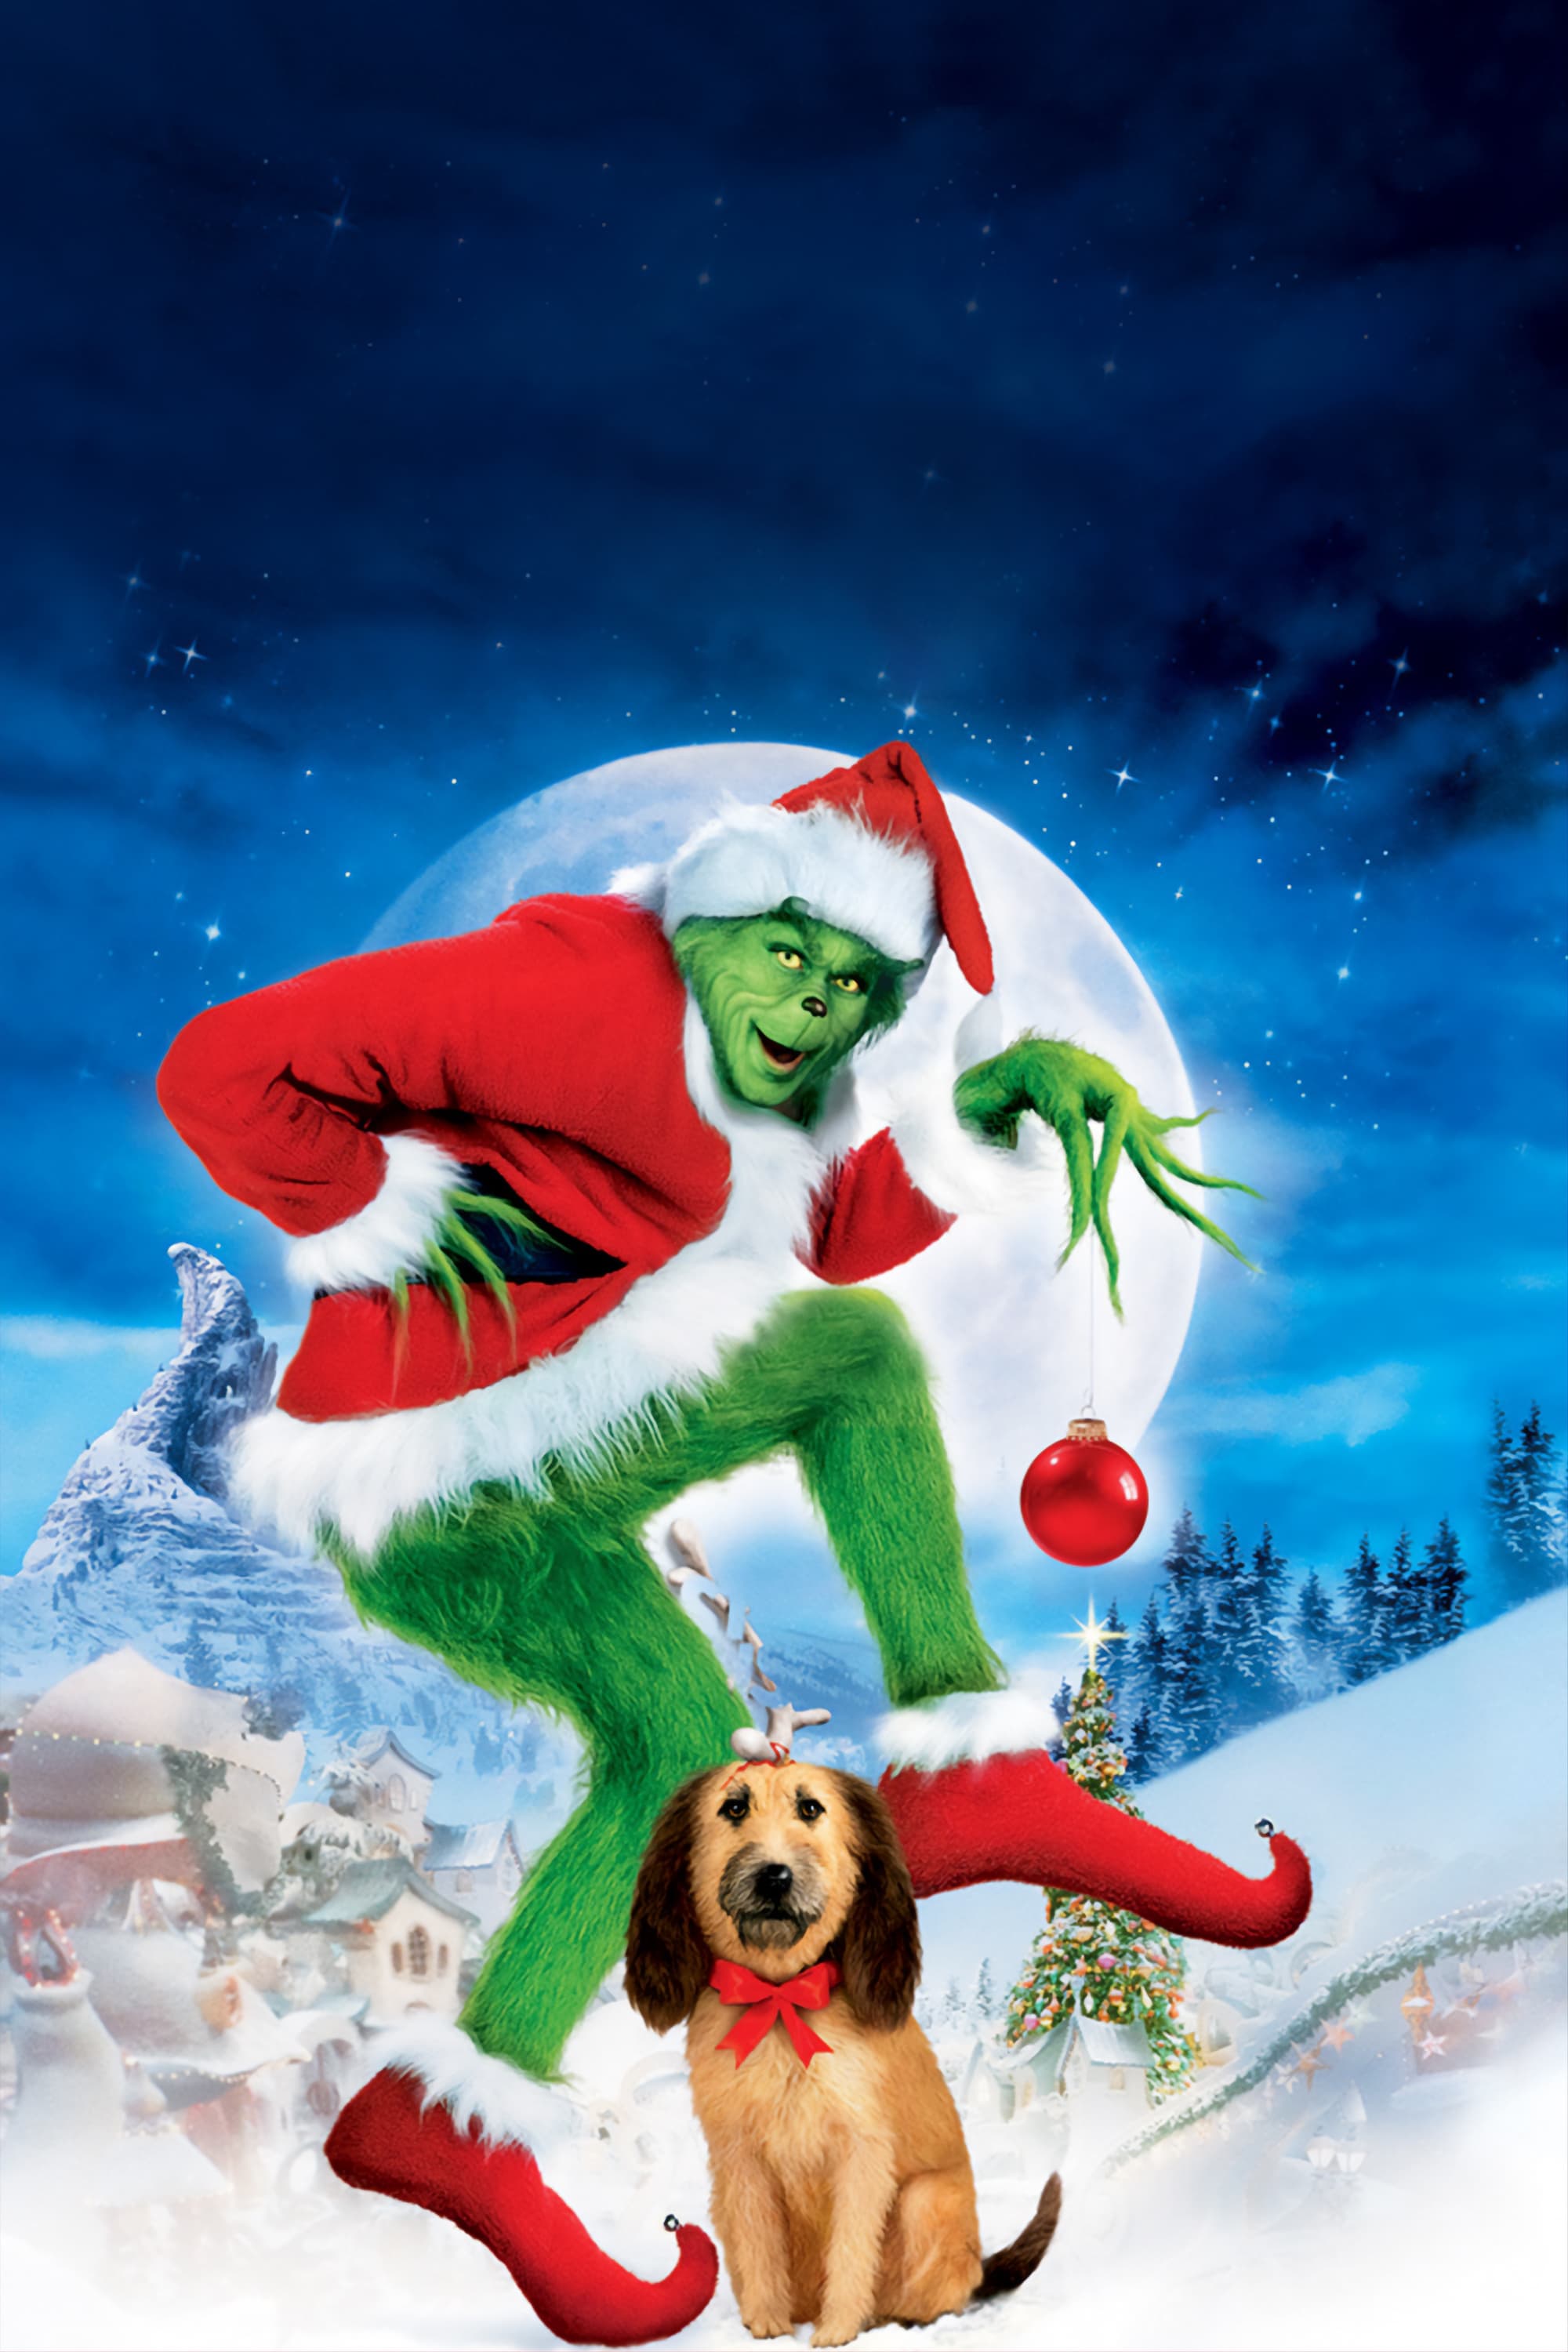 How the Grinch Stole Christmas POSTER